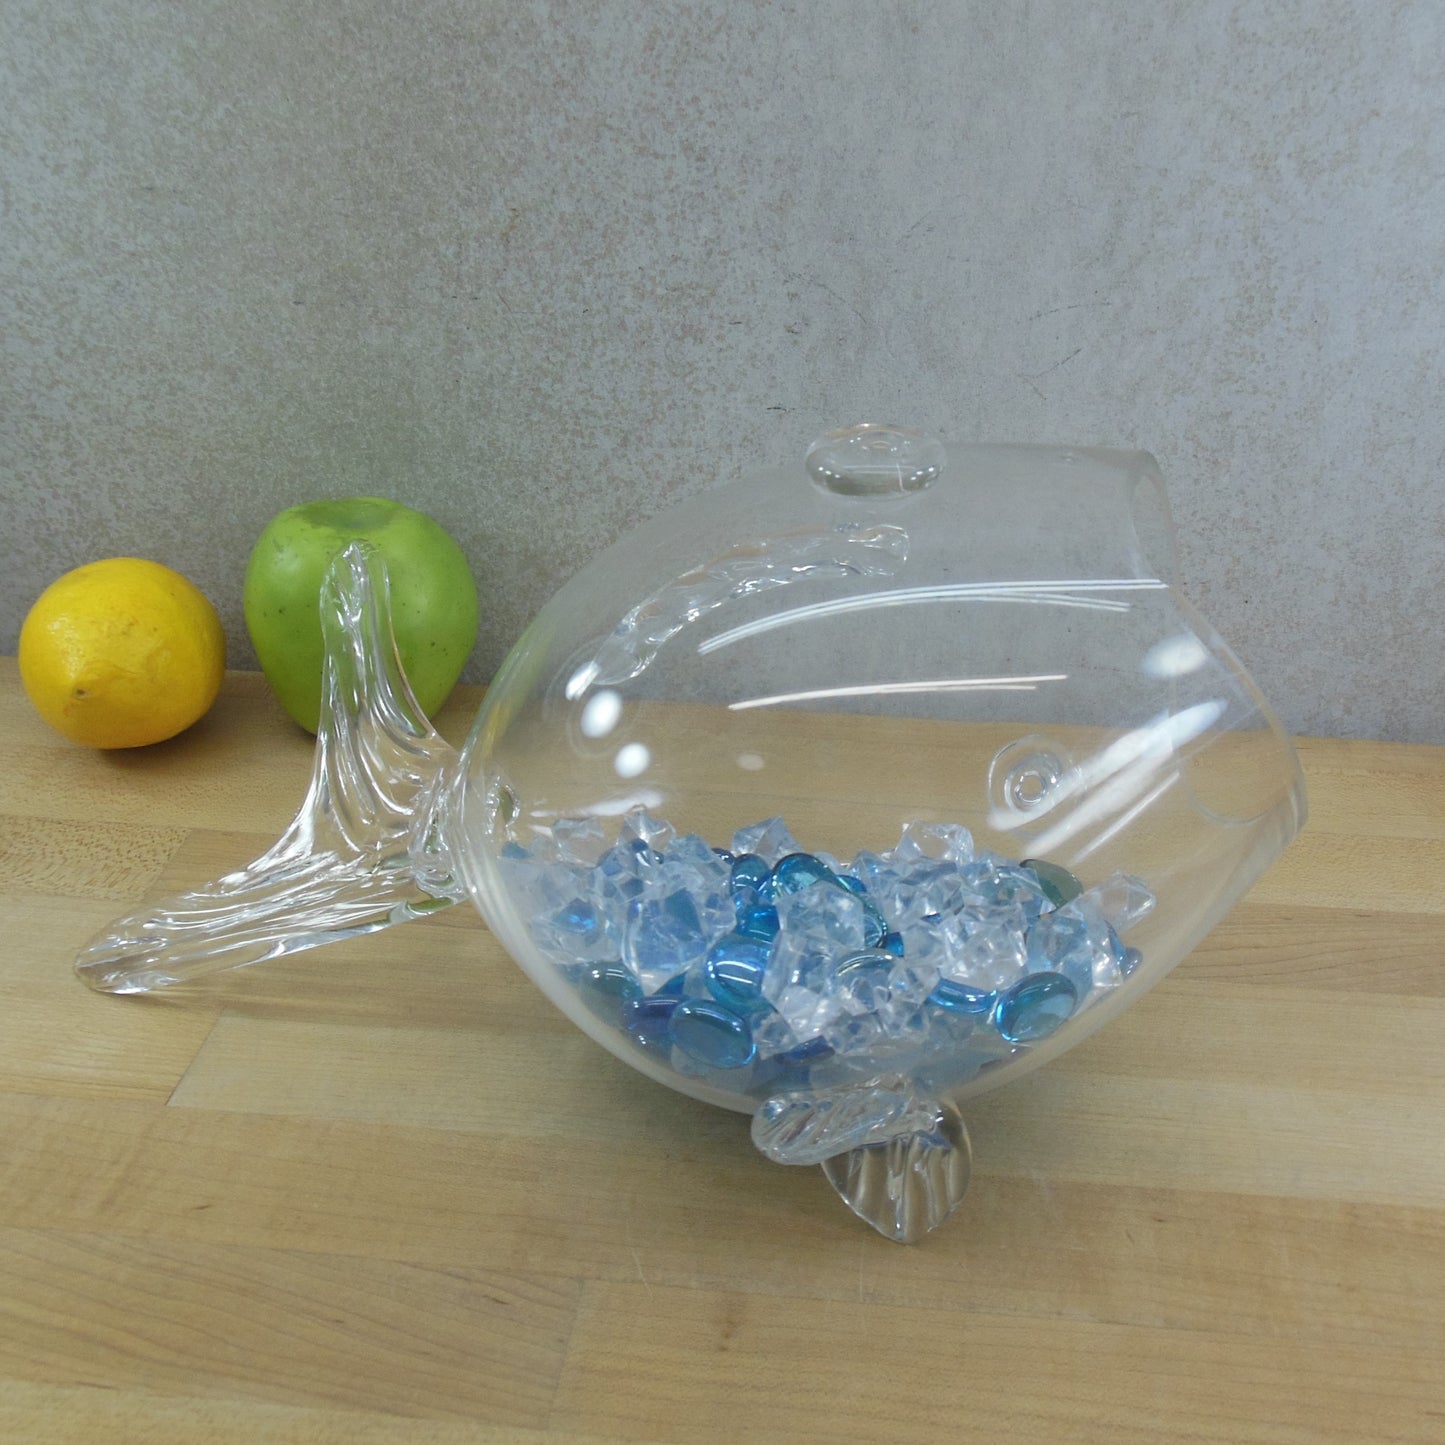 Unbranded Blenko Style Blown Art Clear Glass Fish Vase Bowl Figurine used